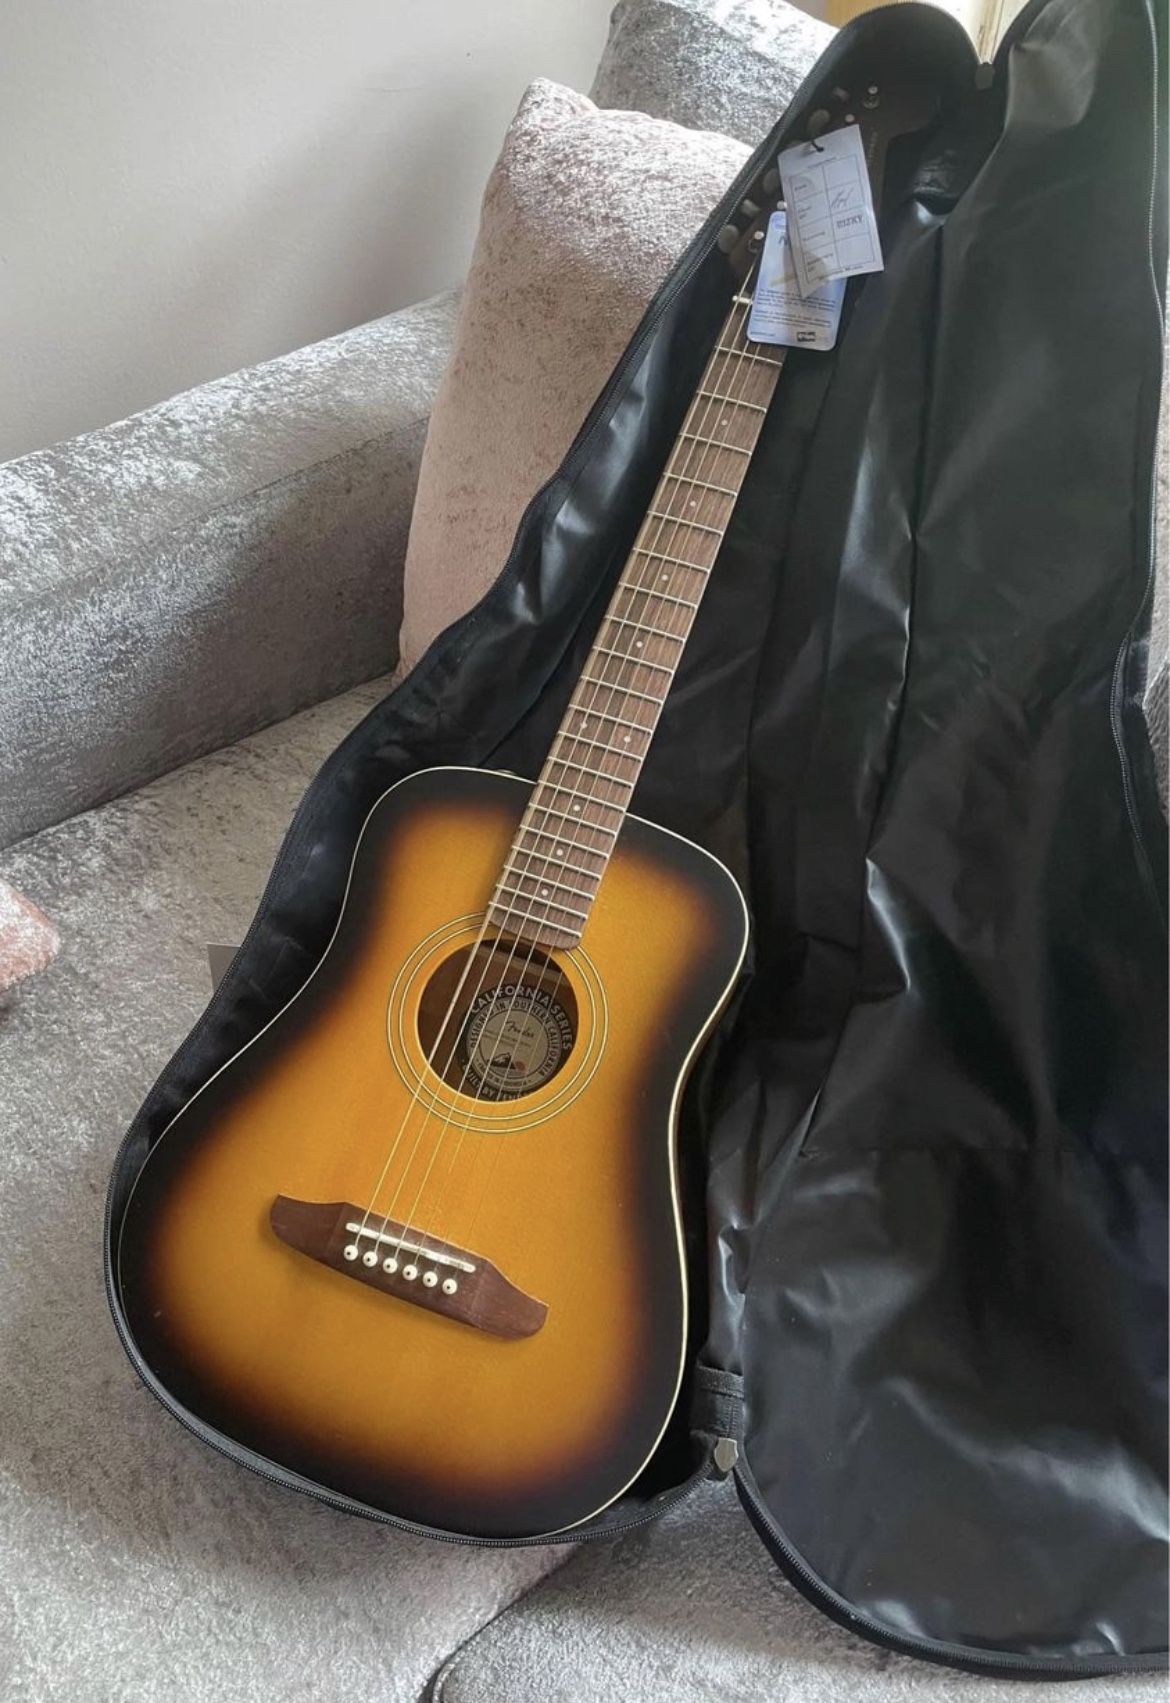 New Fender Redondo mini acoustic guitar with storage carry bag